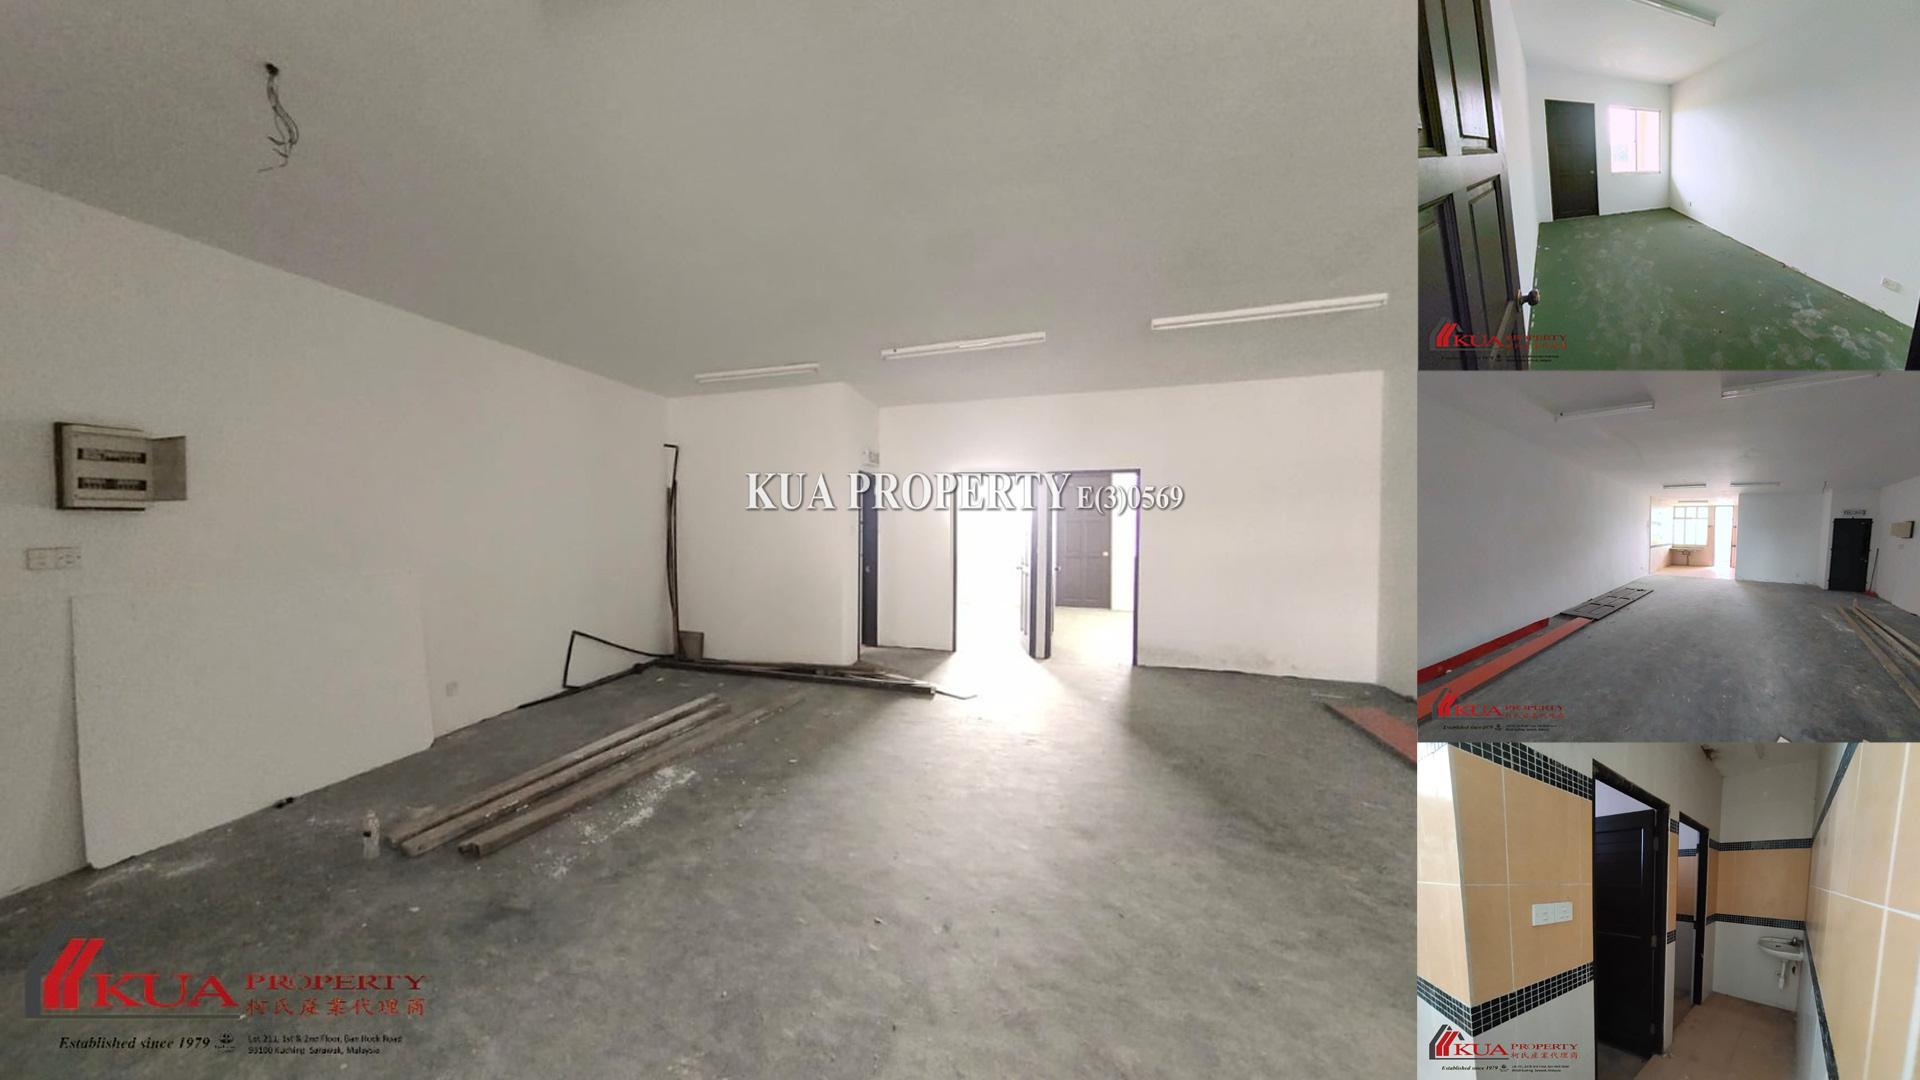 Third Floor Shoplot For Rent! at Stutong, Near ONE TJ